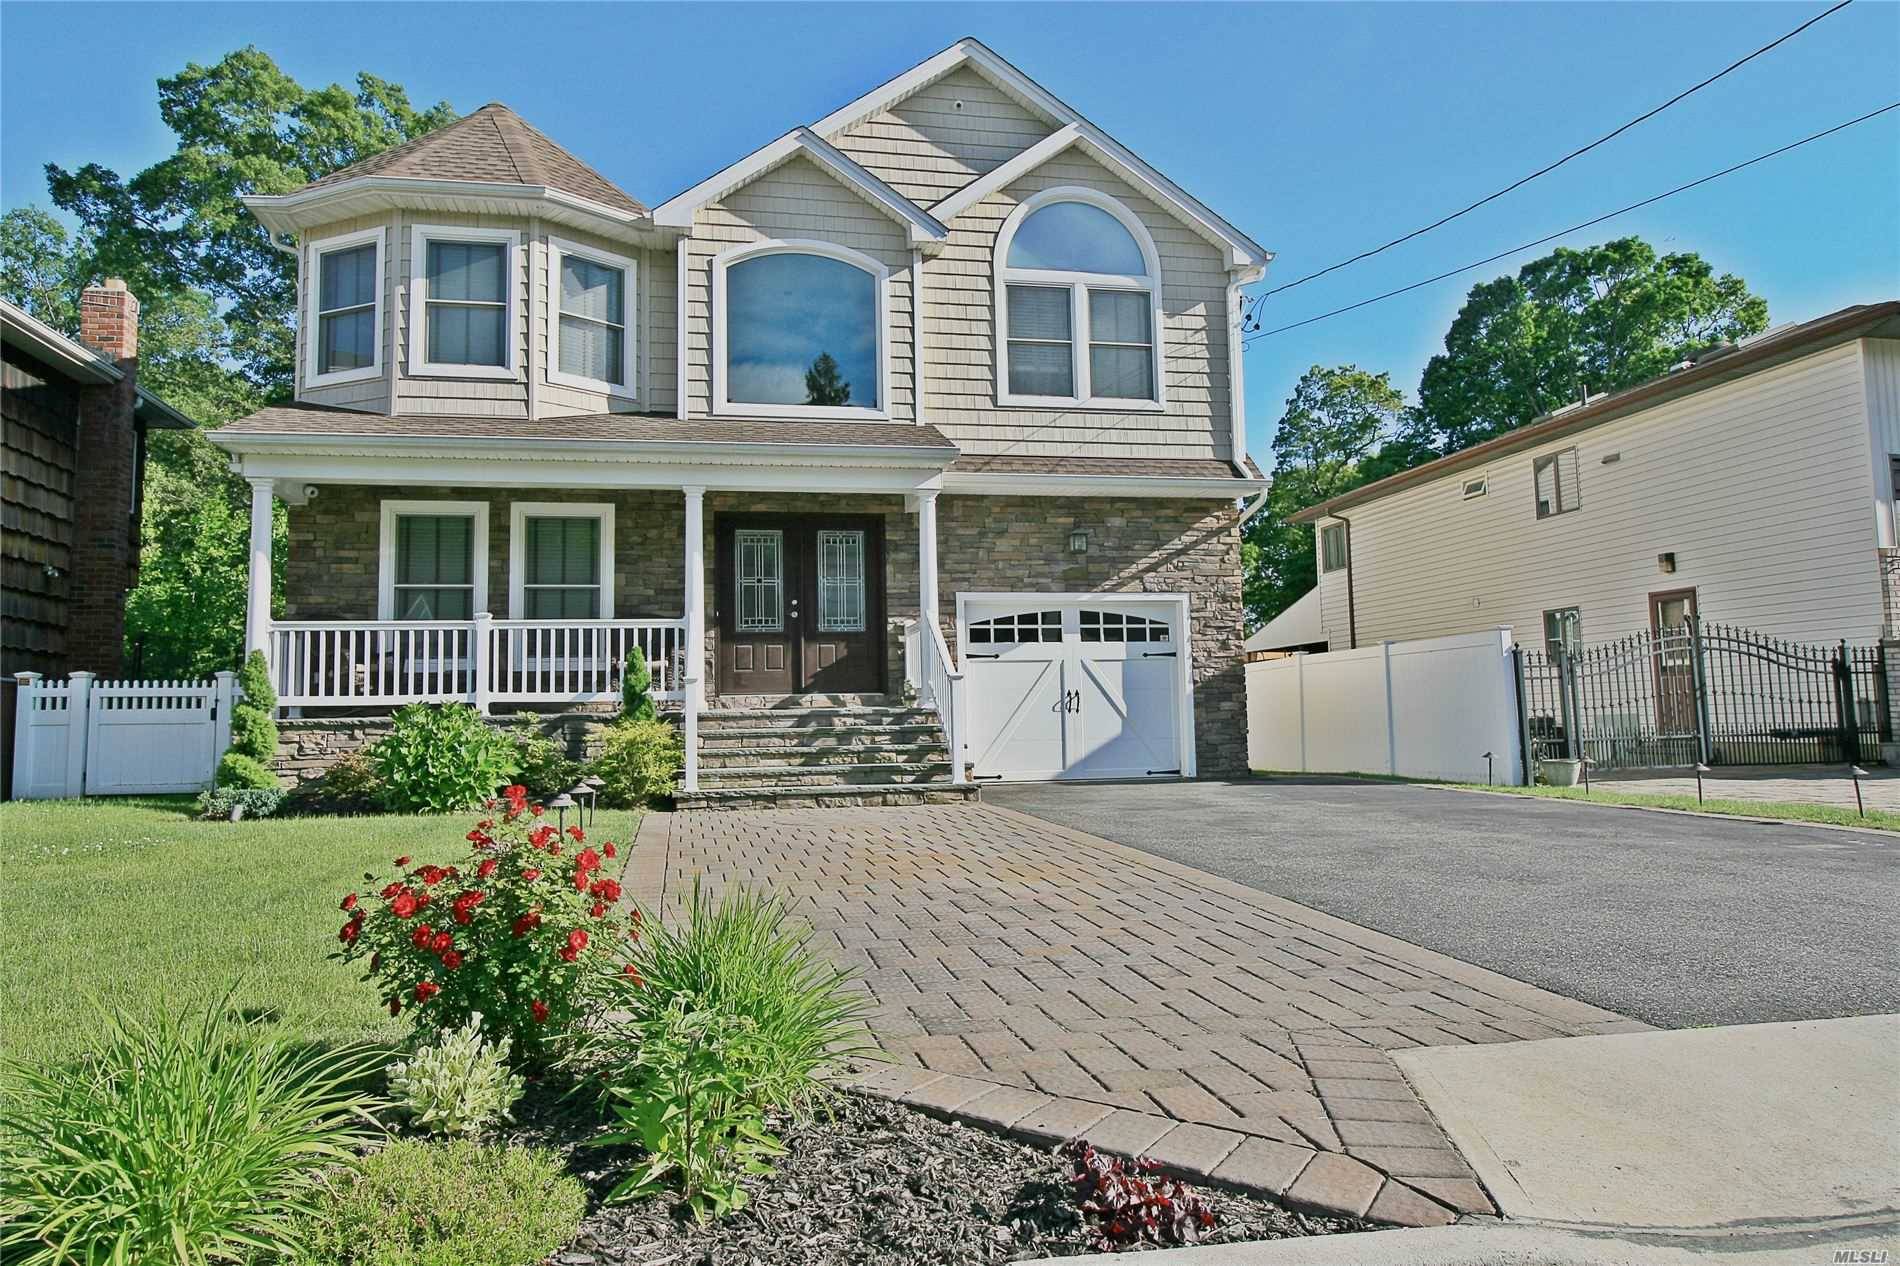 Nestled in the Twin Lakes enclave of Wantagh, this elegant stoic colonial built in 2013 sits on a fully fenced 240' deep lot !